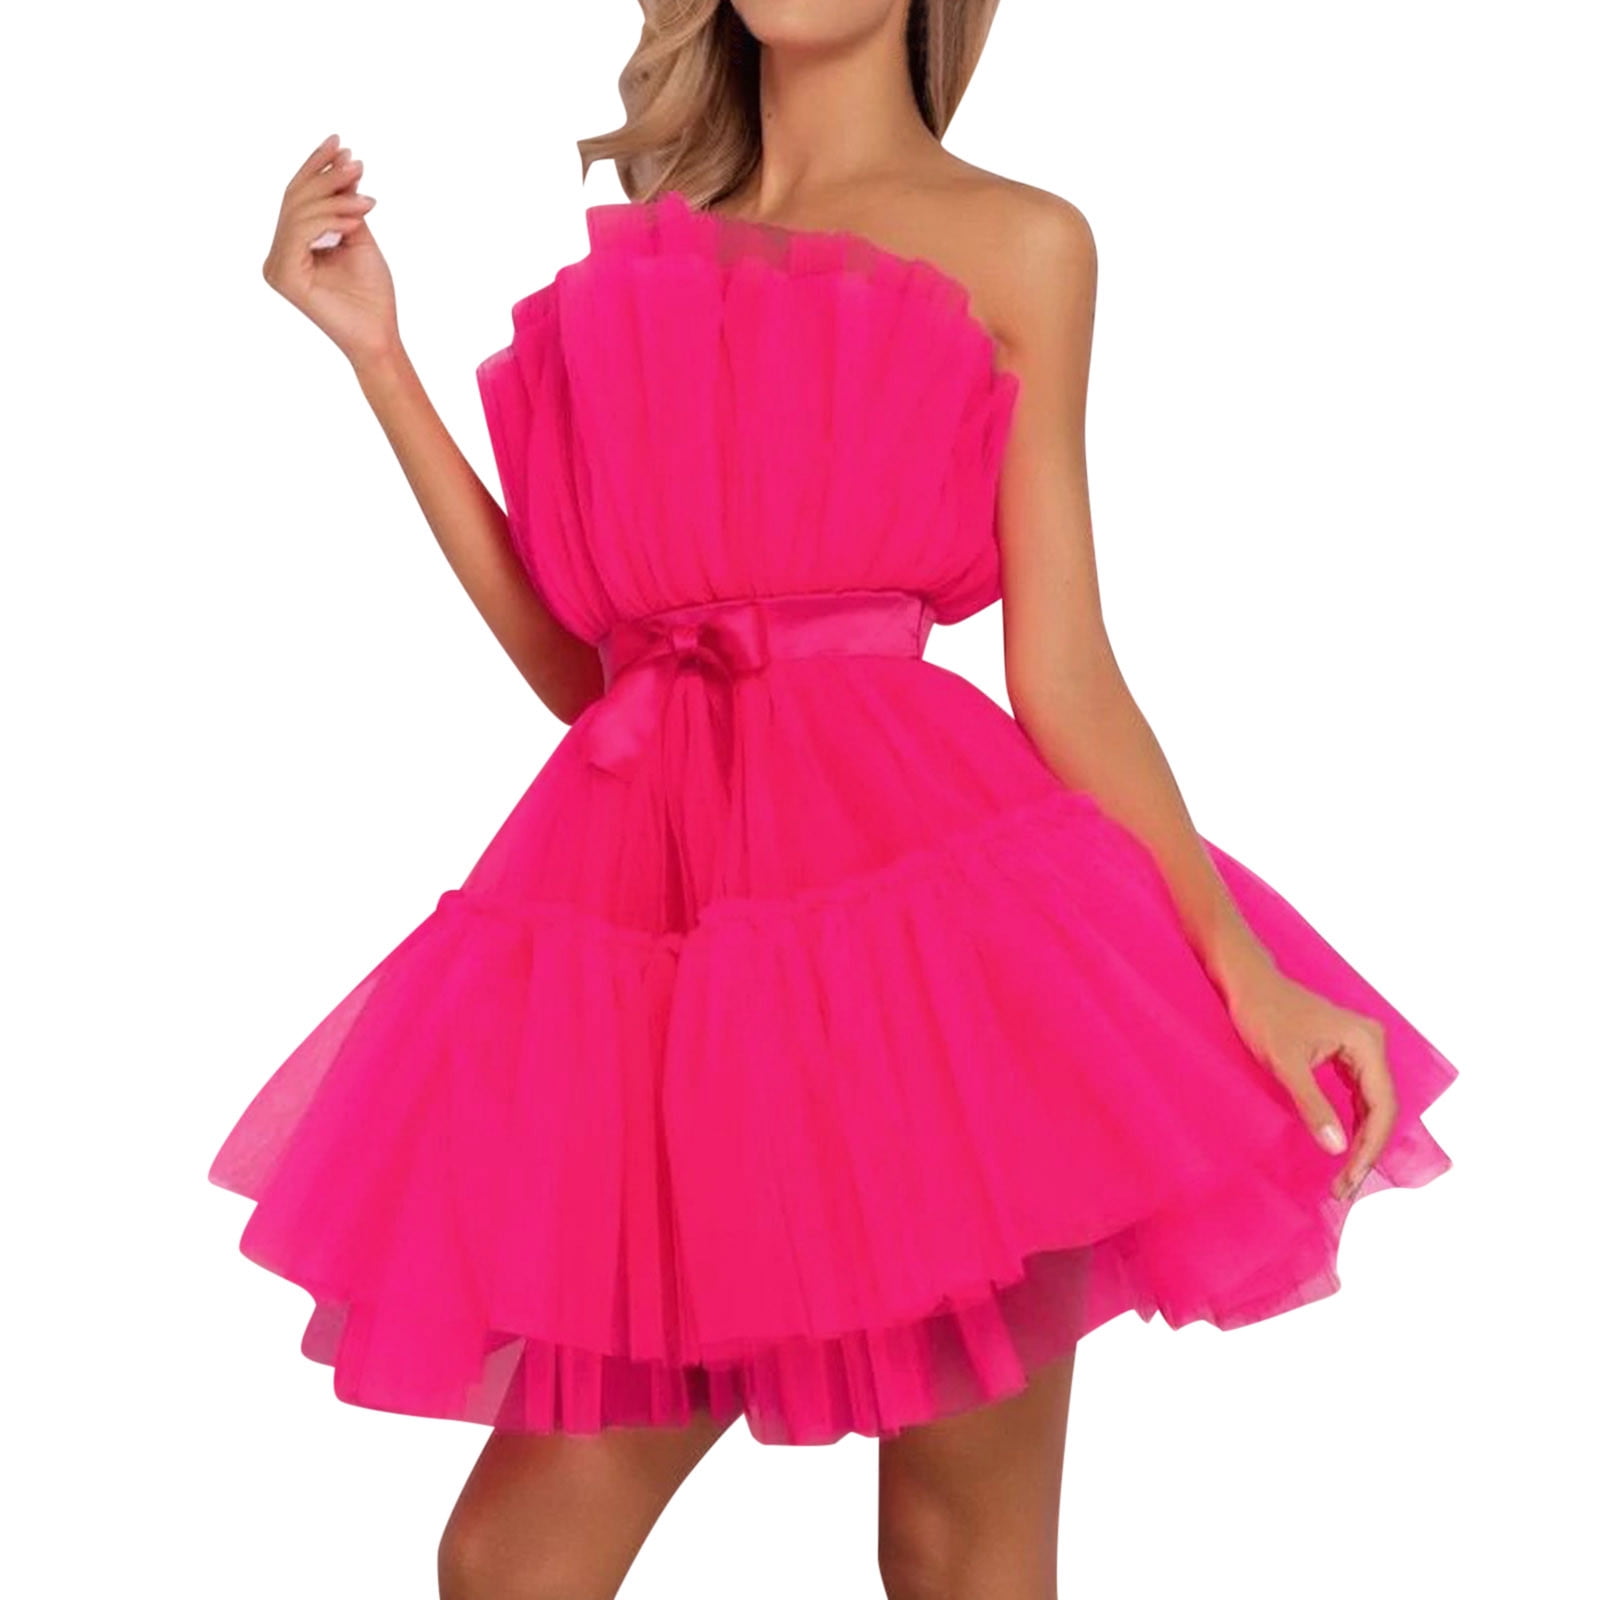 Fluffy Tulle Puffy Tulle Dress With Black Belt. Tulle Frills